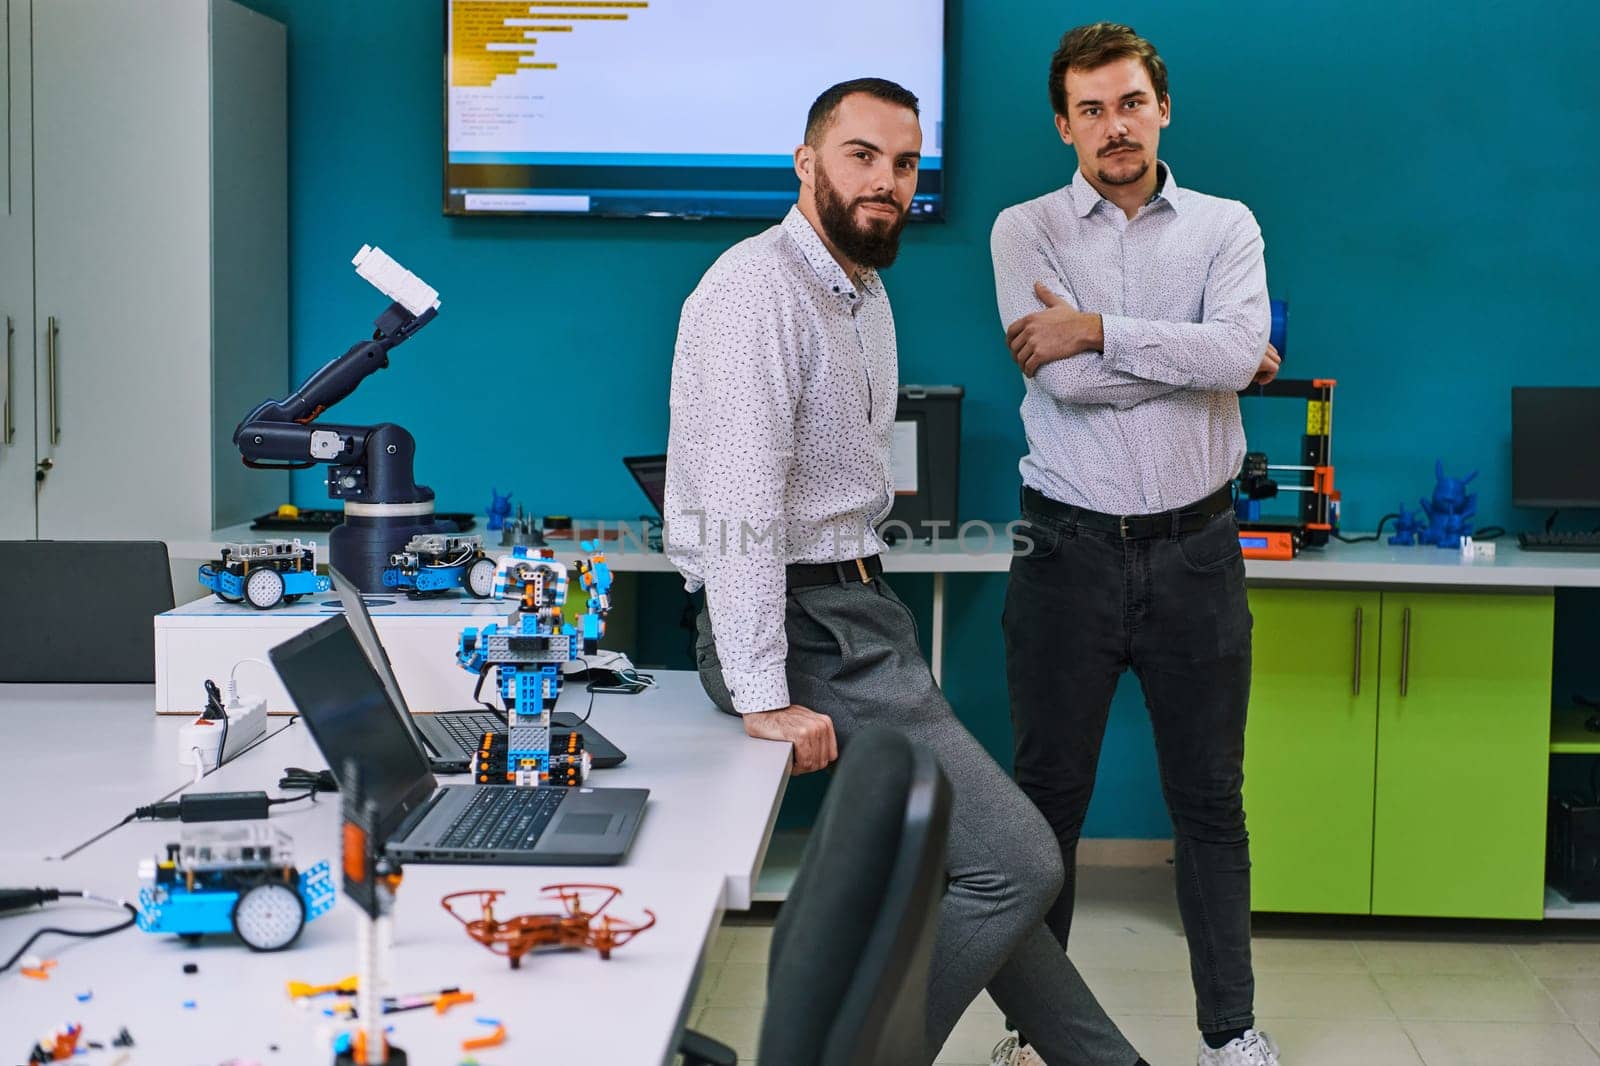 A group of colleagues collaborate in a lab while testing a 3D printer, demonstrating their commitment to technological advancement and scientific research